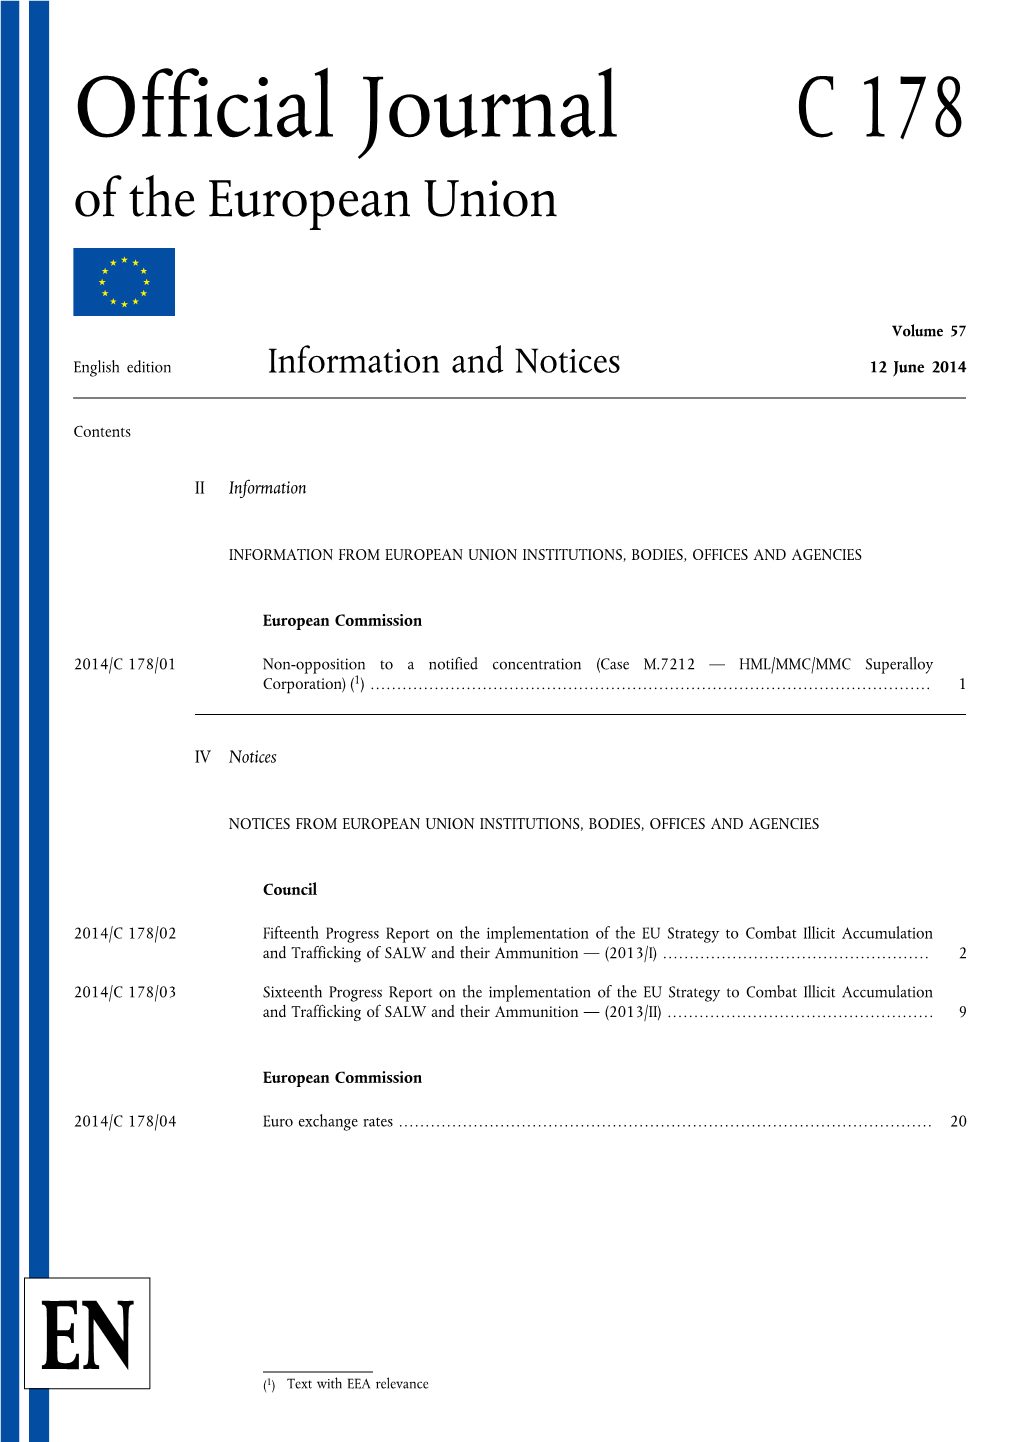 Official Journal C 178 of the European Union